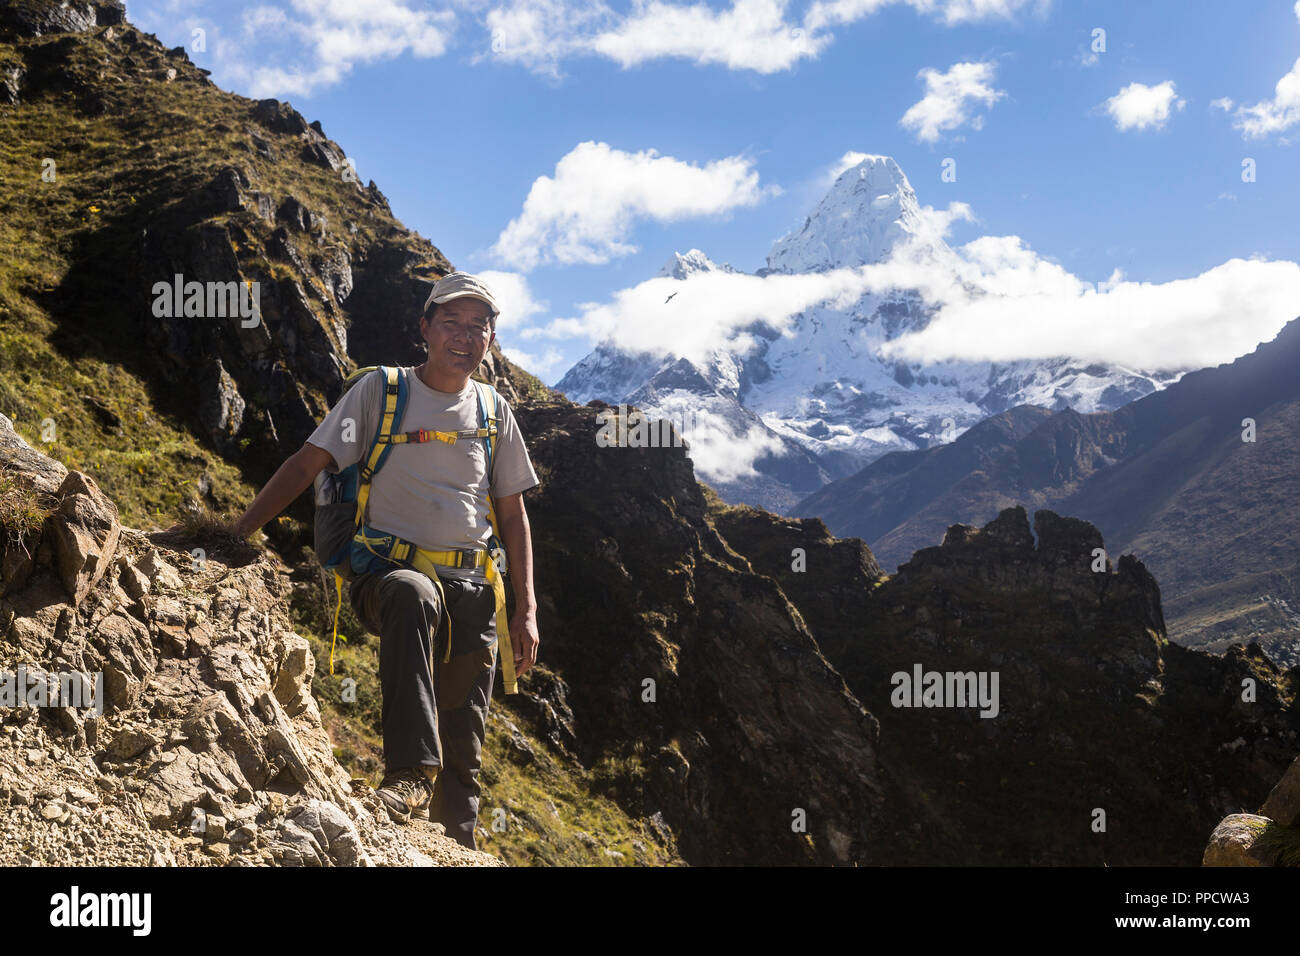 Sange Sherpa, a Nepalese mountain guide stands for a photo along the trekking route towards Everest Base Camp, Ama Dablam can be seen in the distance, which the guide has climbed before, Phortse, Solu Khumbu, Nepal Stock Photo